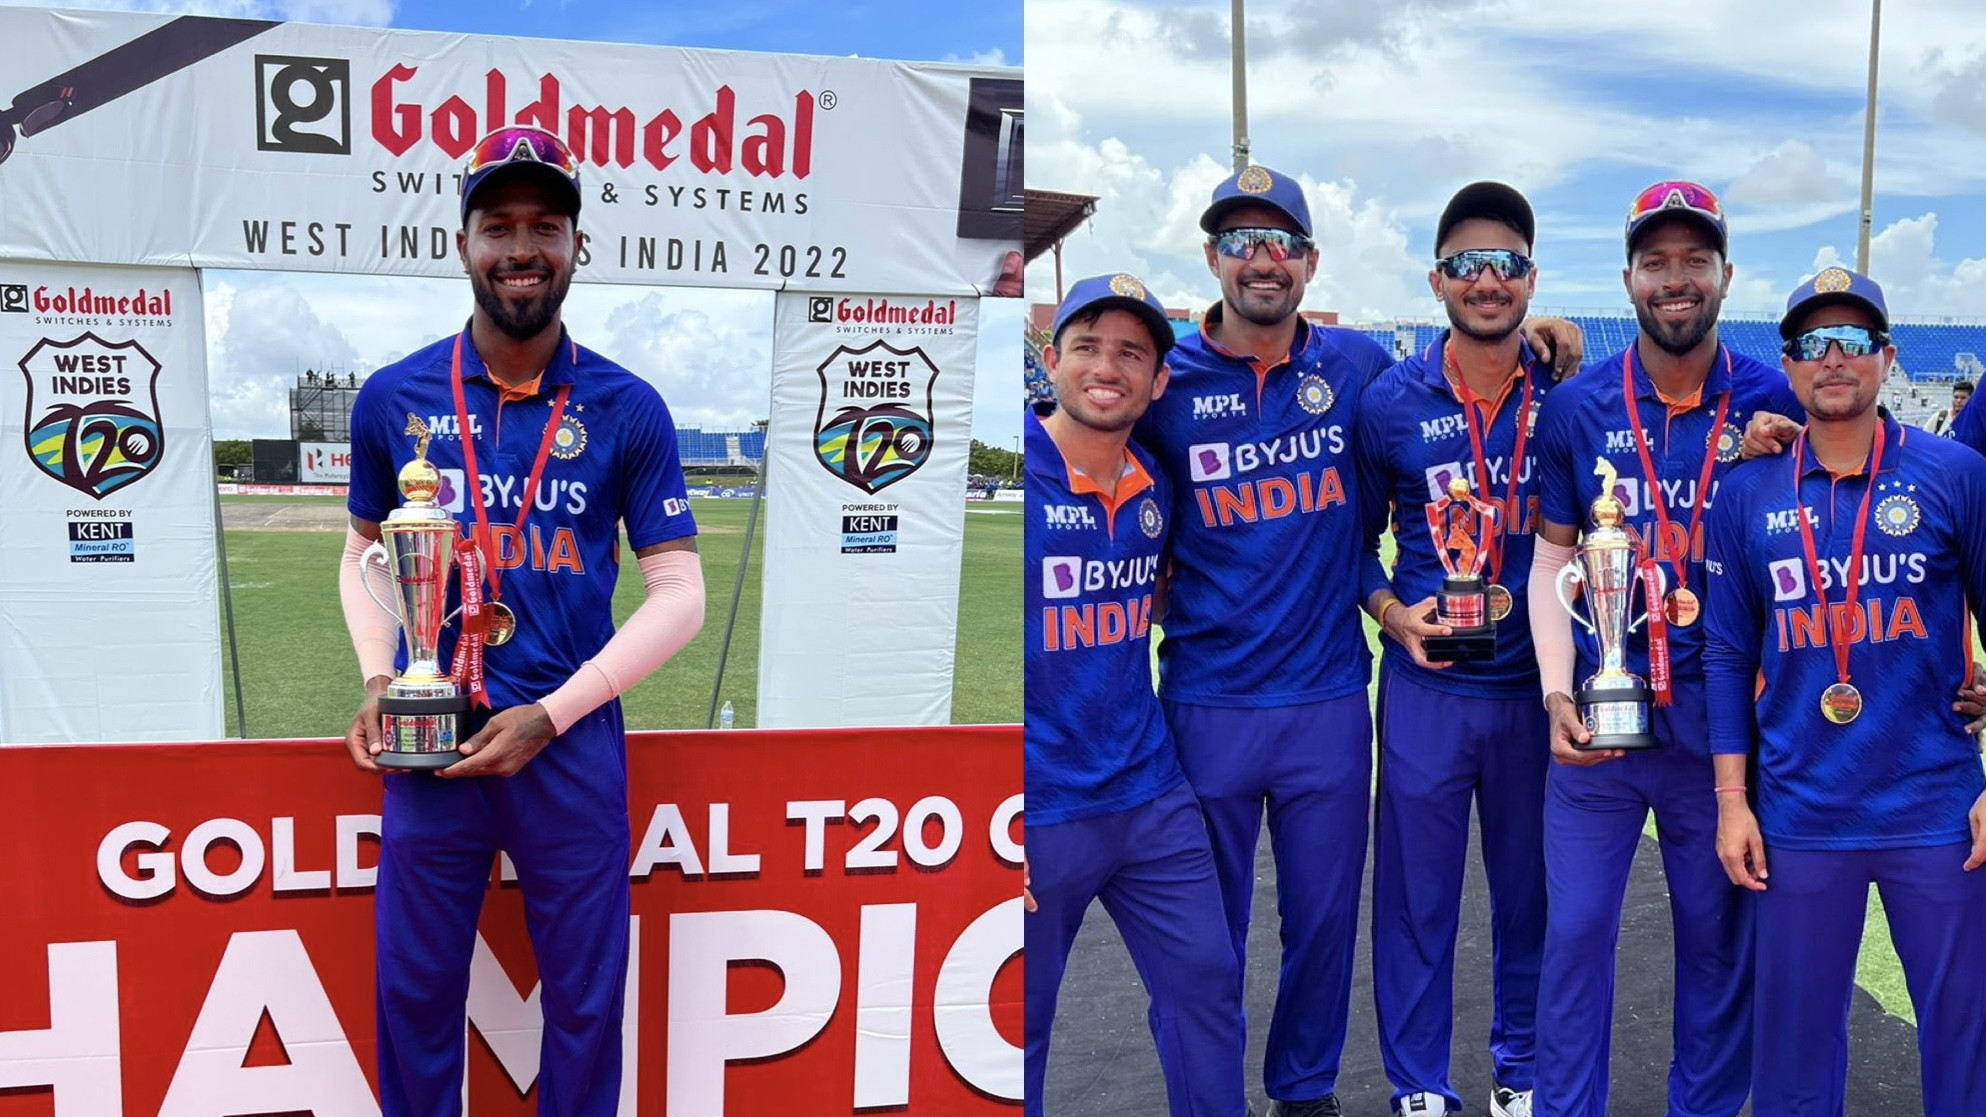 WI v IND 2022: “This is the New India,” Hardik Pandya after 4-1 T20I series win over West Indies